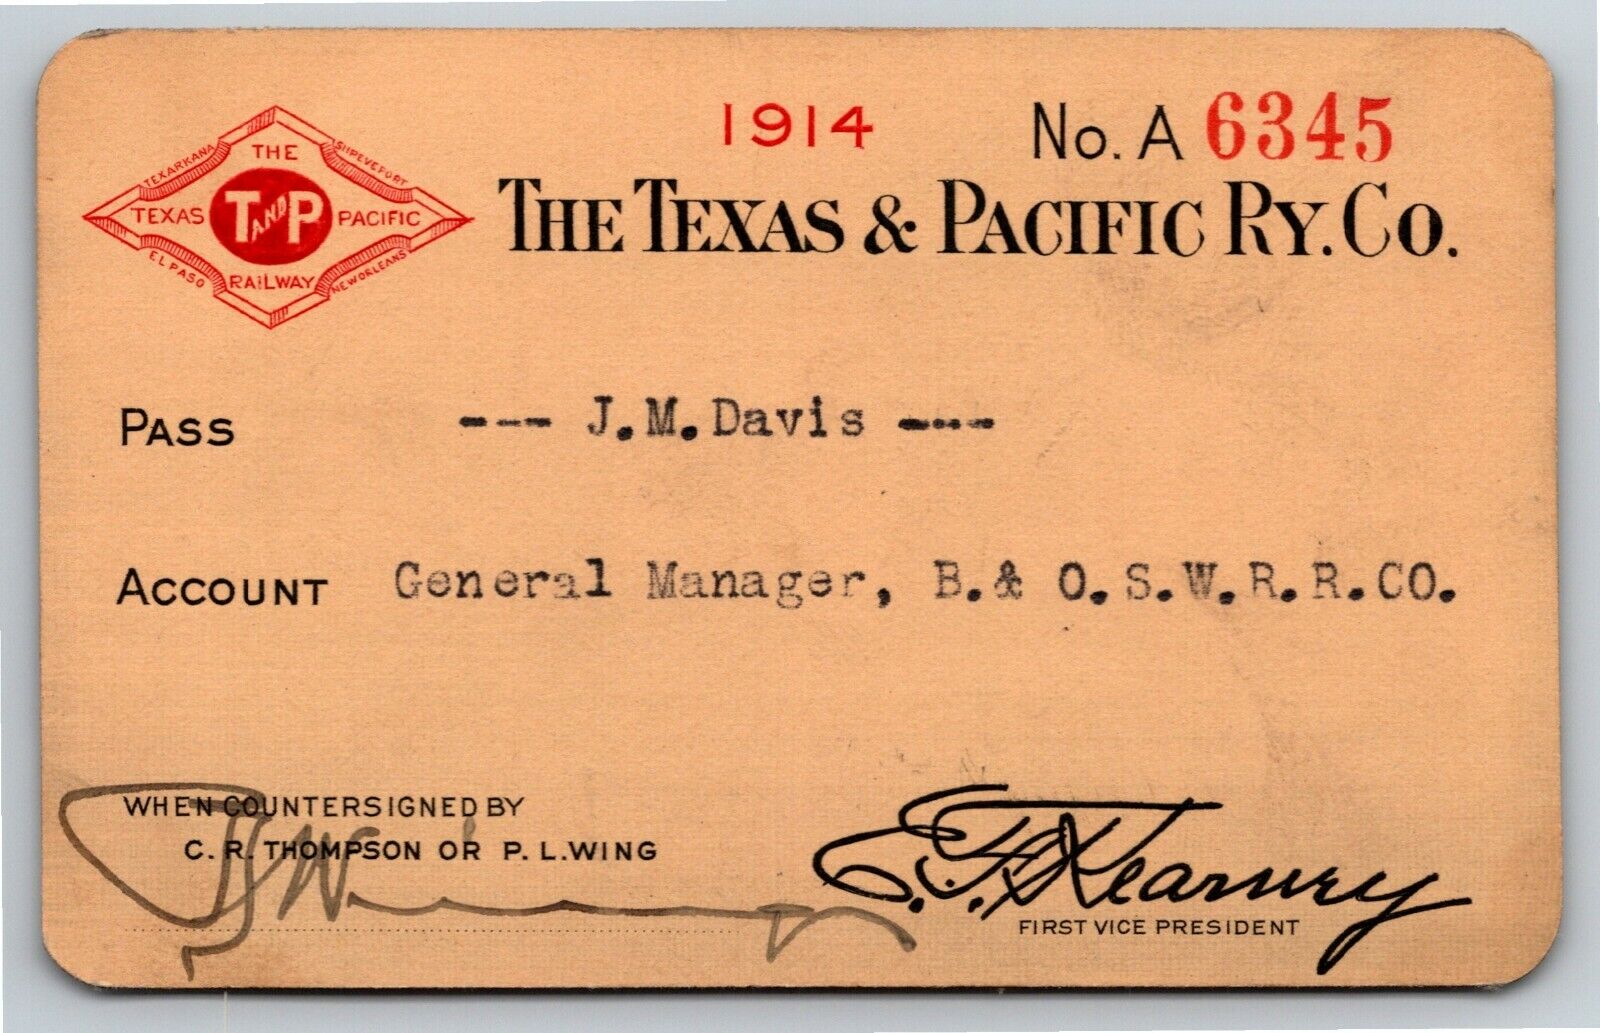 Vintage Railroad Annual Pass - The Texas & Pacific RY 1914 - 6345 Thermography